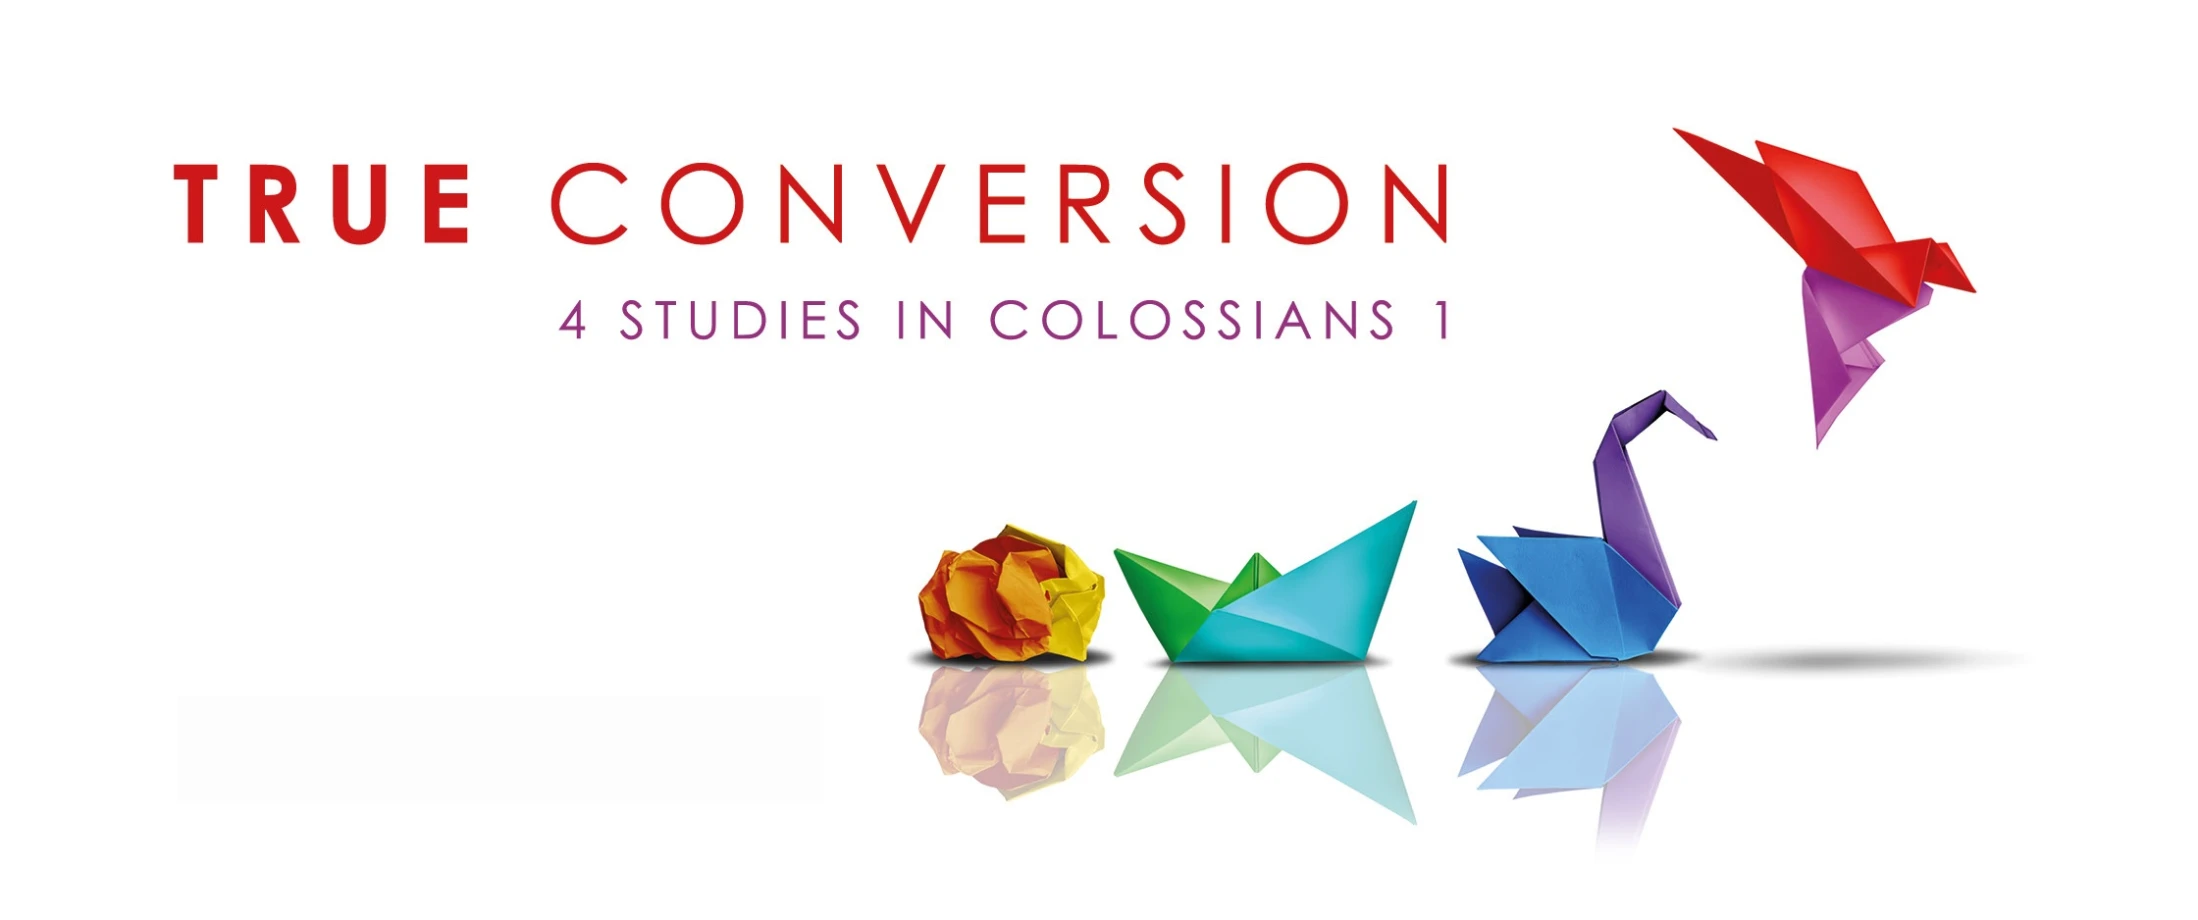 ‘Conversion to a cause’